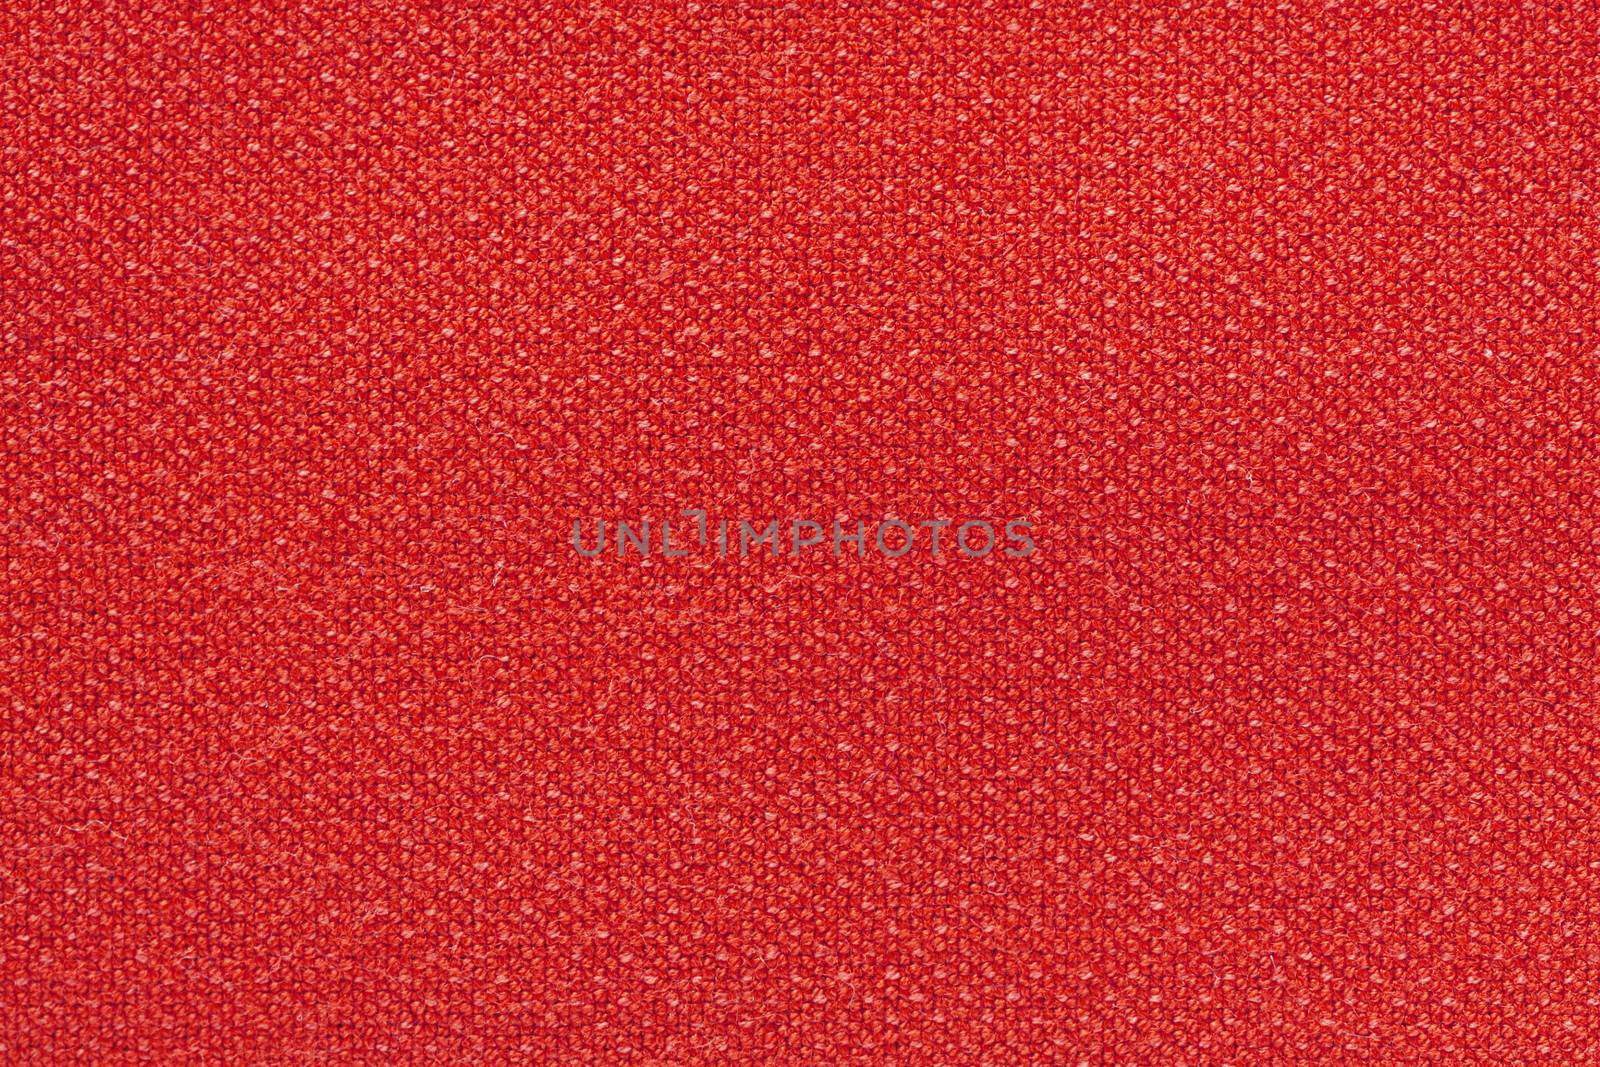 red washed carpet texture, linen canvas white texture background.